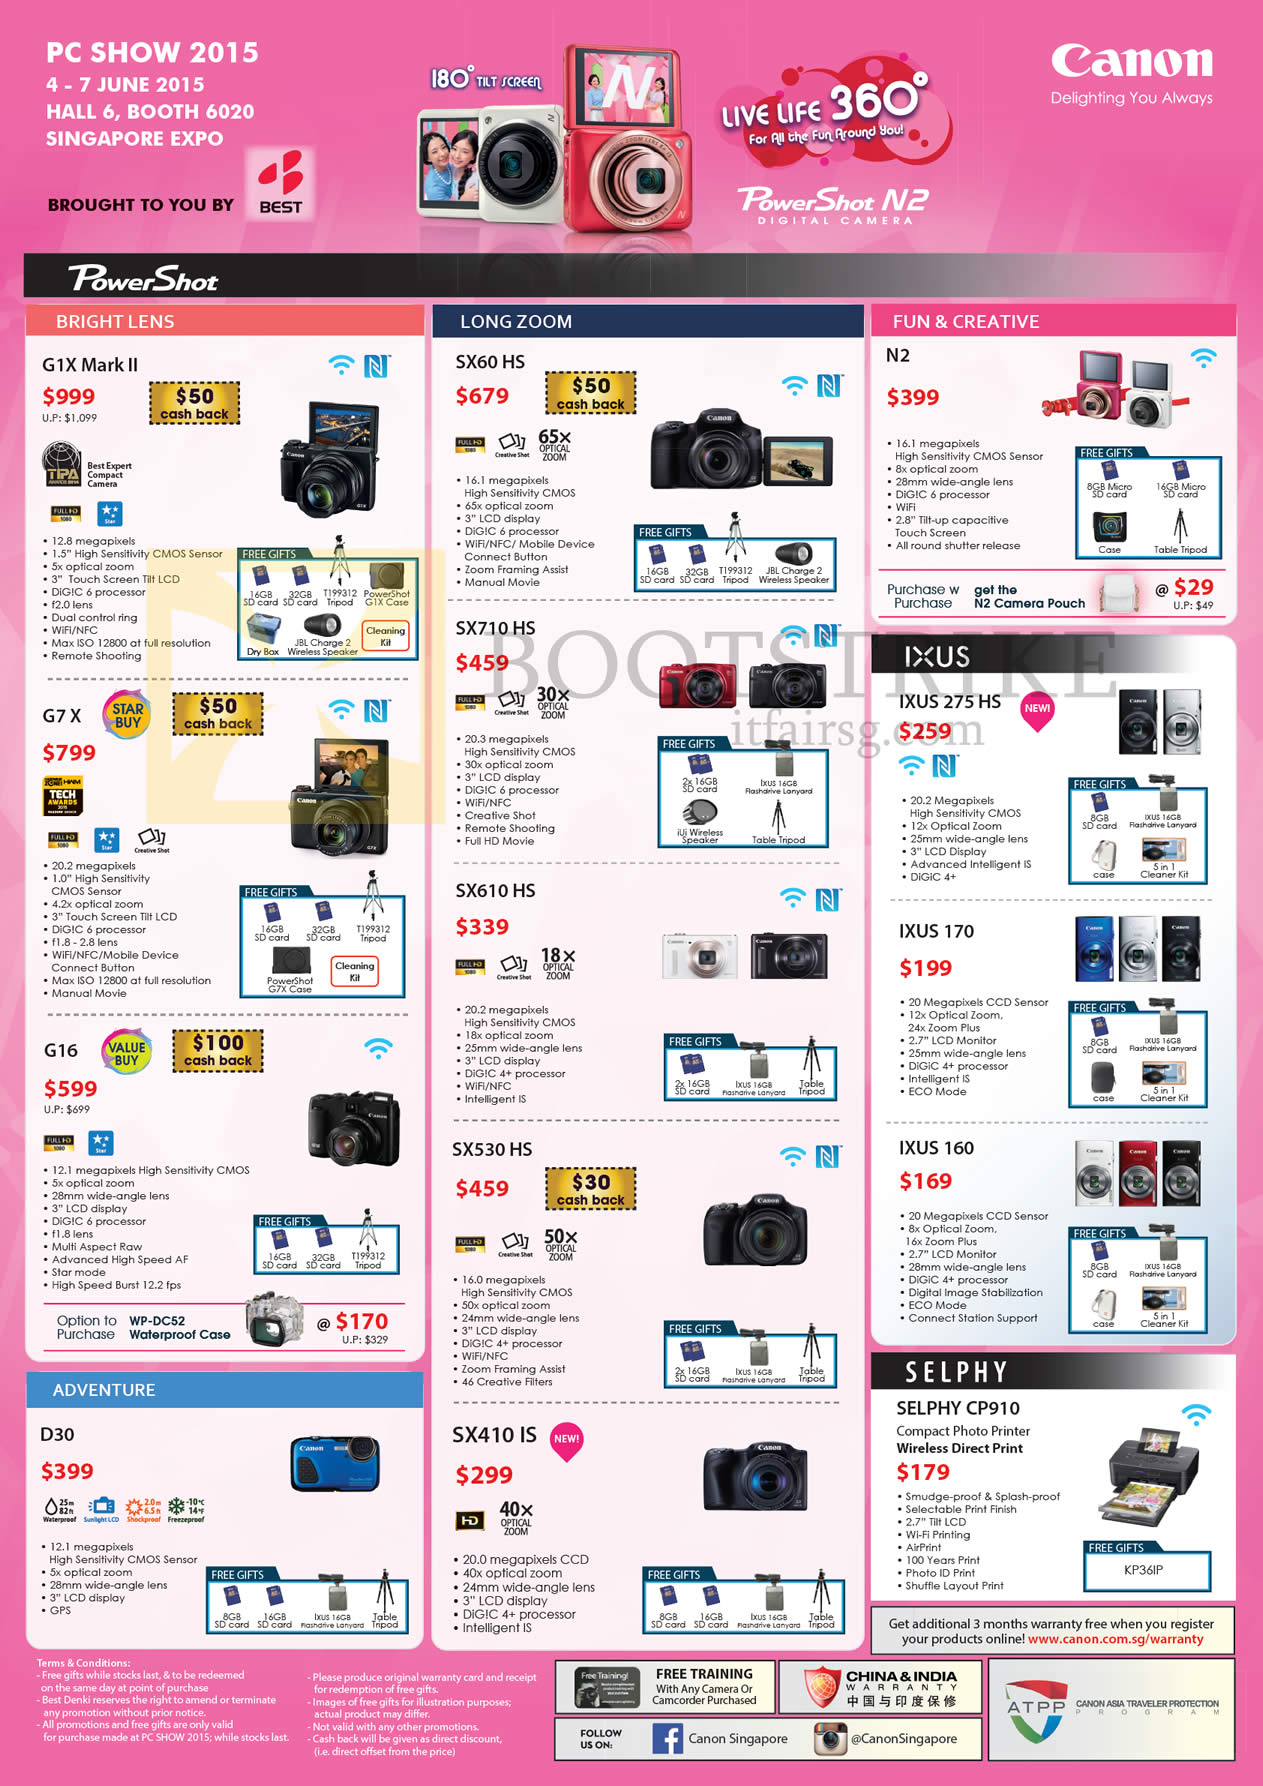 PC SHOW 2015 price list image brochure of Canon Digital Cameras PowerShot, IXUS, Selphy Photo Printer G1X Mark II, SX60 HS, SX710 HS, SX610 HS, SX530 HS, G16, D30, SX410 IS, N2, Ixus 275 HS, 170, 160, Selphy CP910